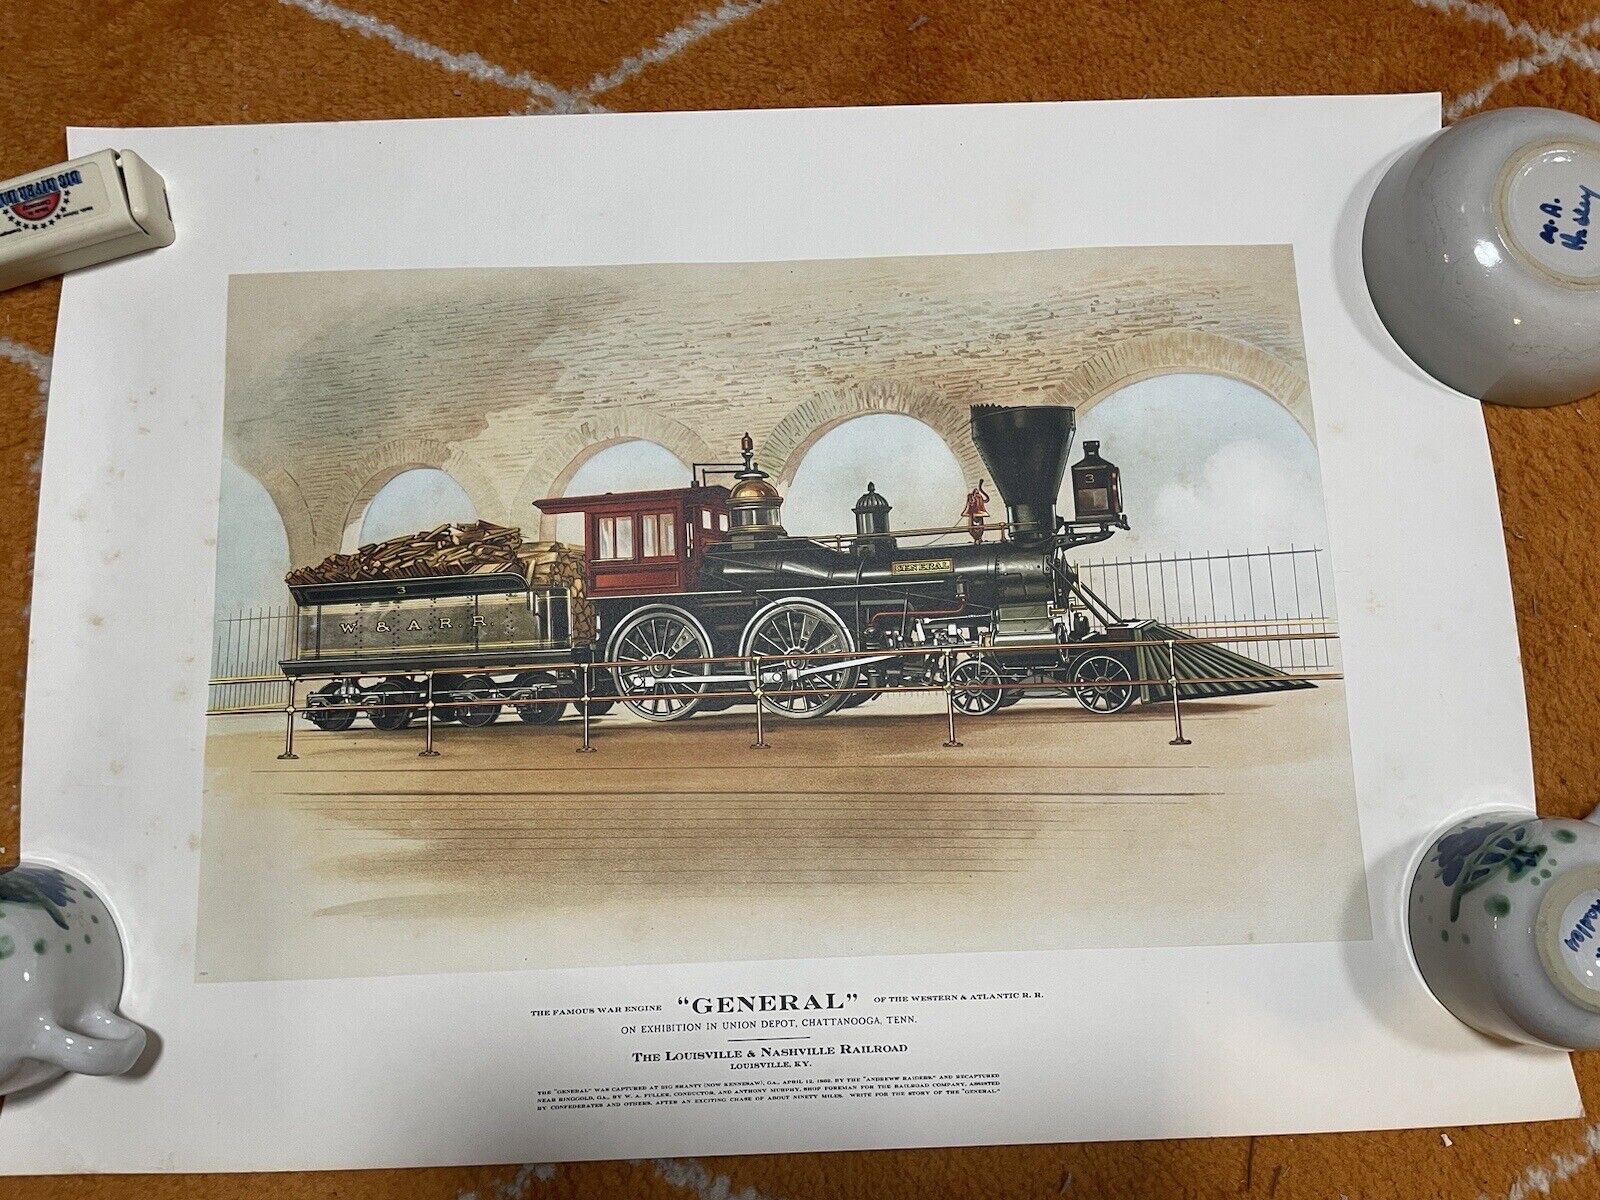 Art Print- The Famous War Engine General Of The Western And Atlantic Railroad